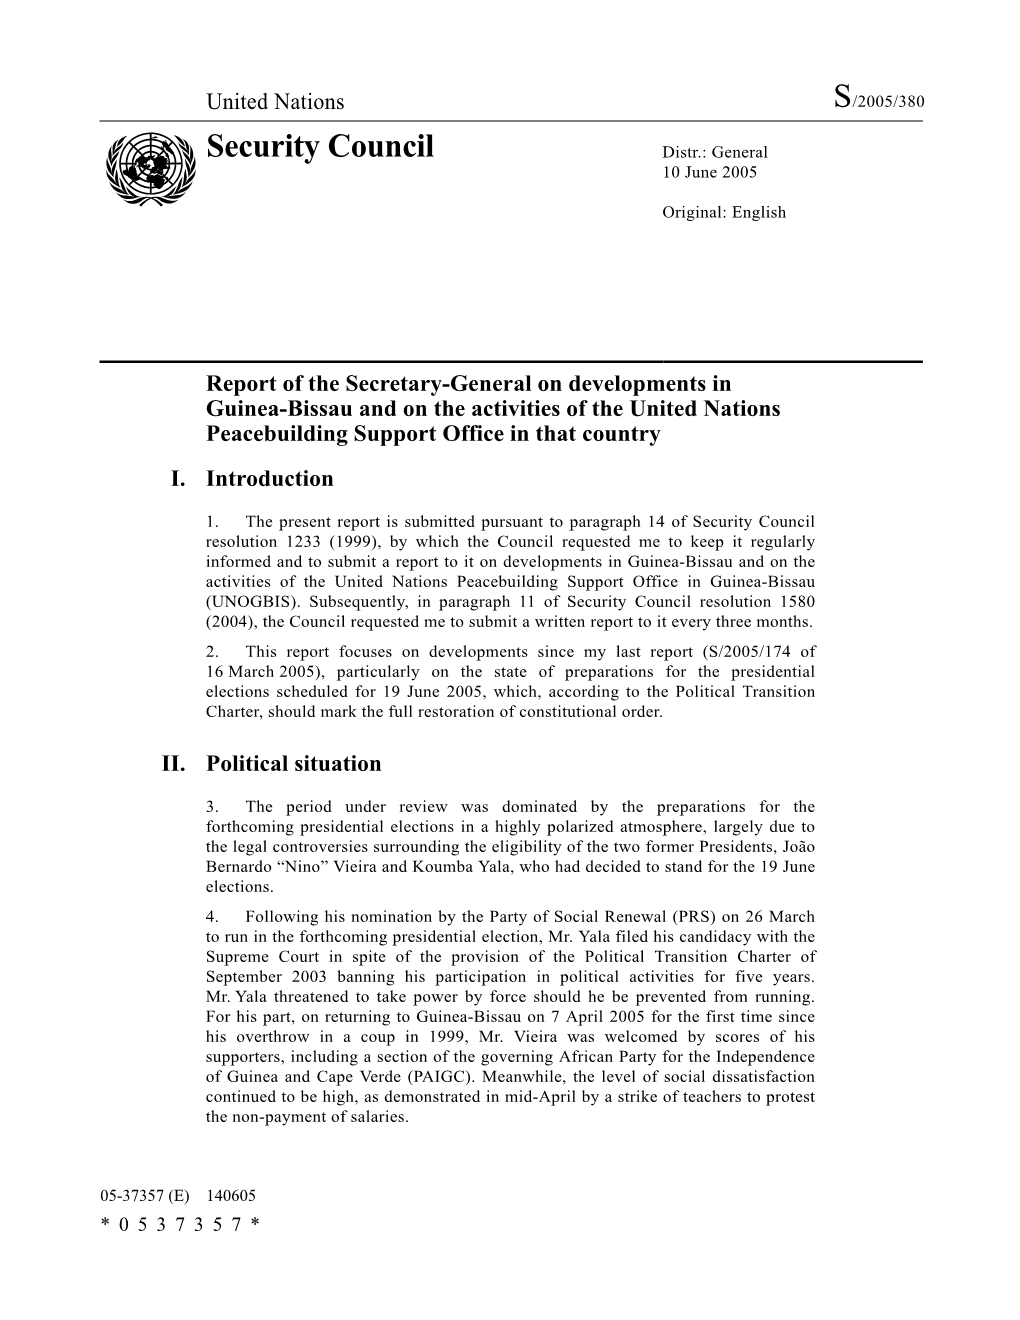 Report of the Secretary-General on Developments in Guinea-Bissau and on the Activities of the United Nations Peacebuilding Support Office in That Country I